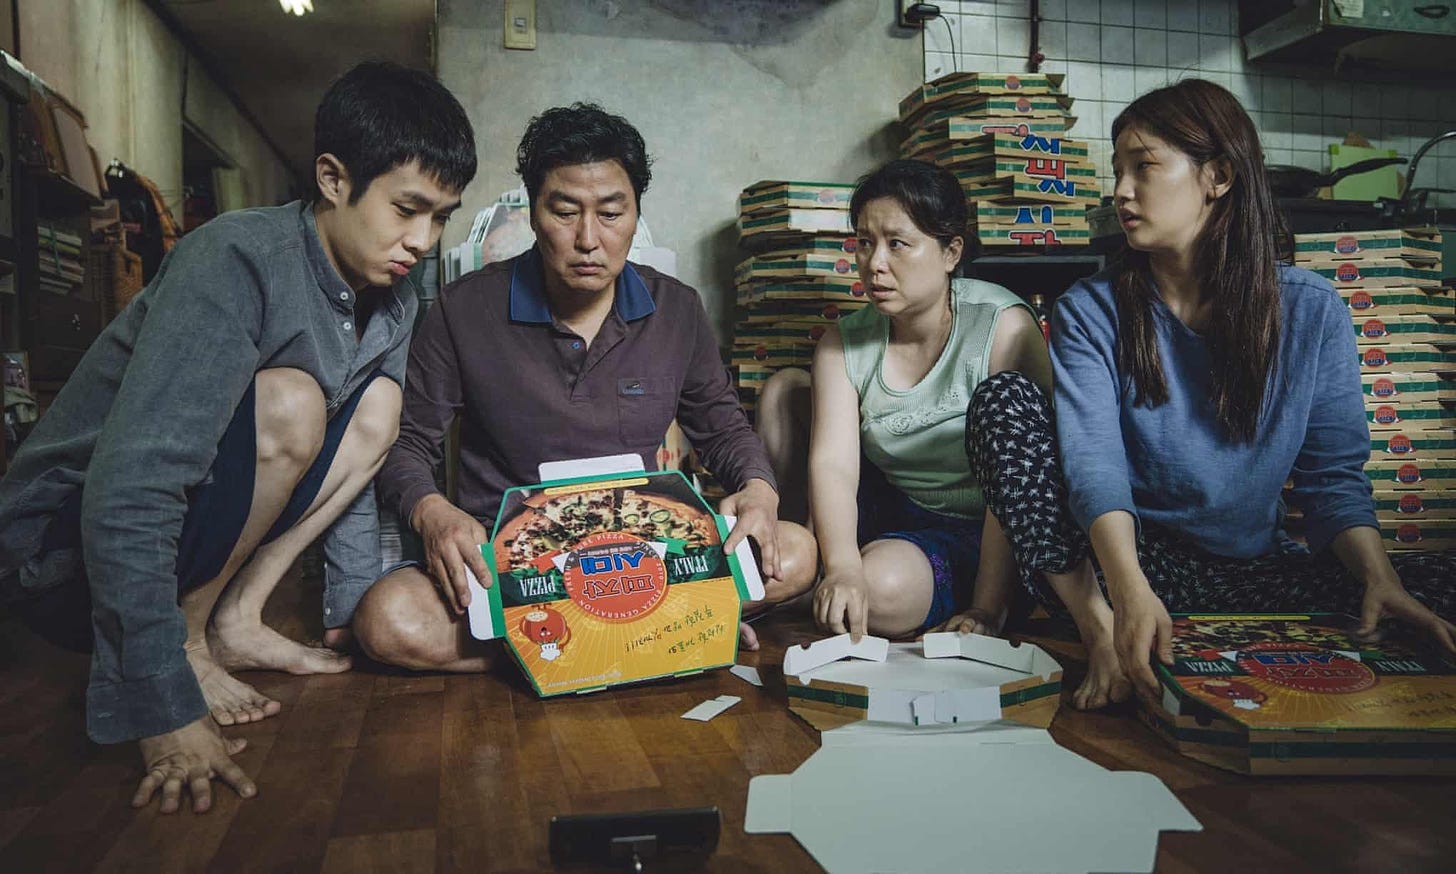 The Kim Family fold pizza boxes in a still from early on in the film Parasite.